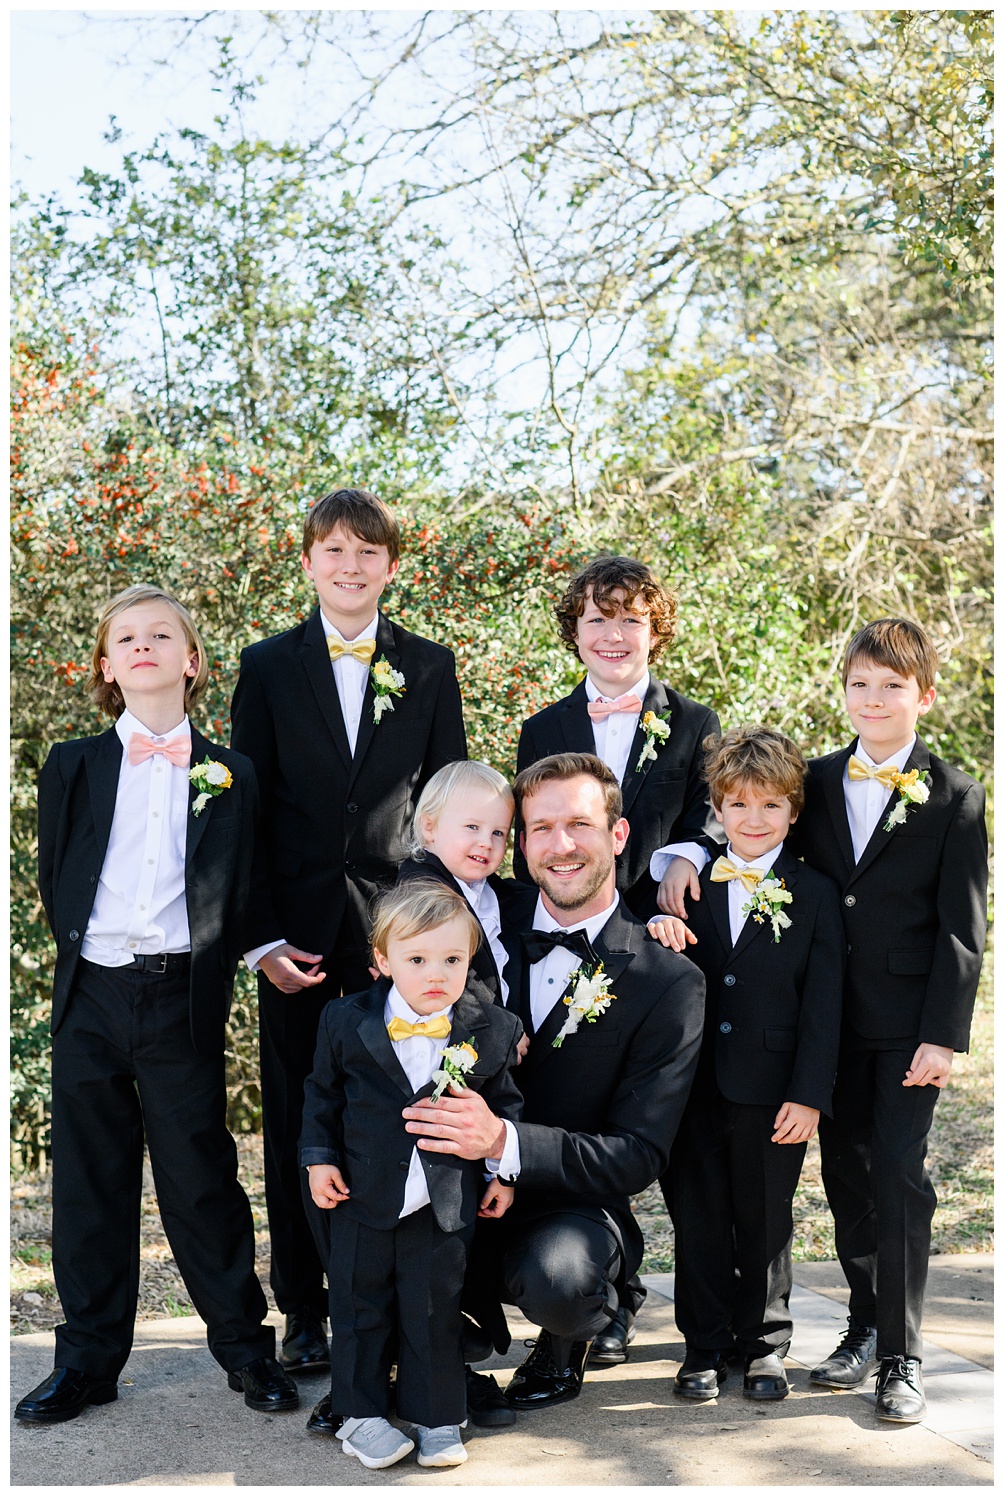 Groom surrounded by 6 ring bearers in yellow and pick bow ties at Marian Shrine of Our Lady of Schoenstatt in Austin Texas